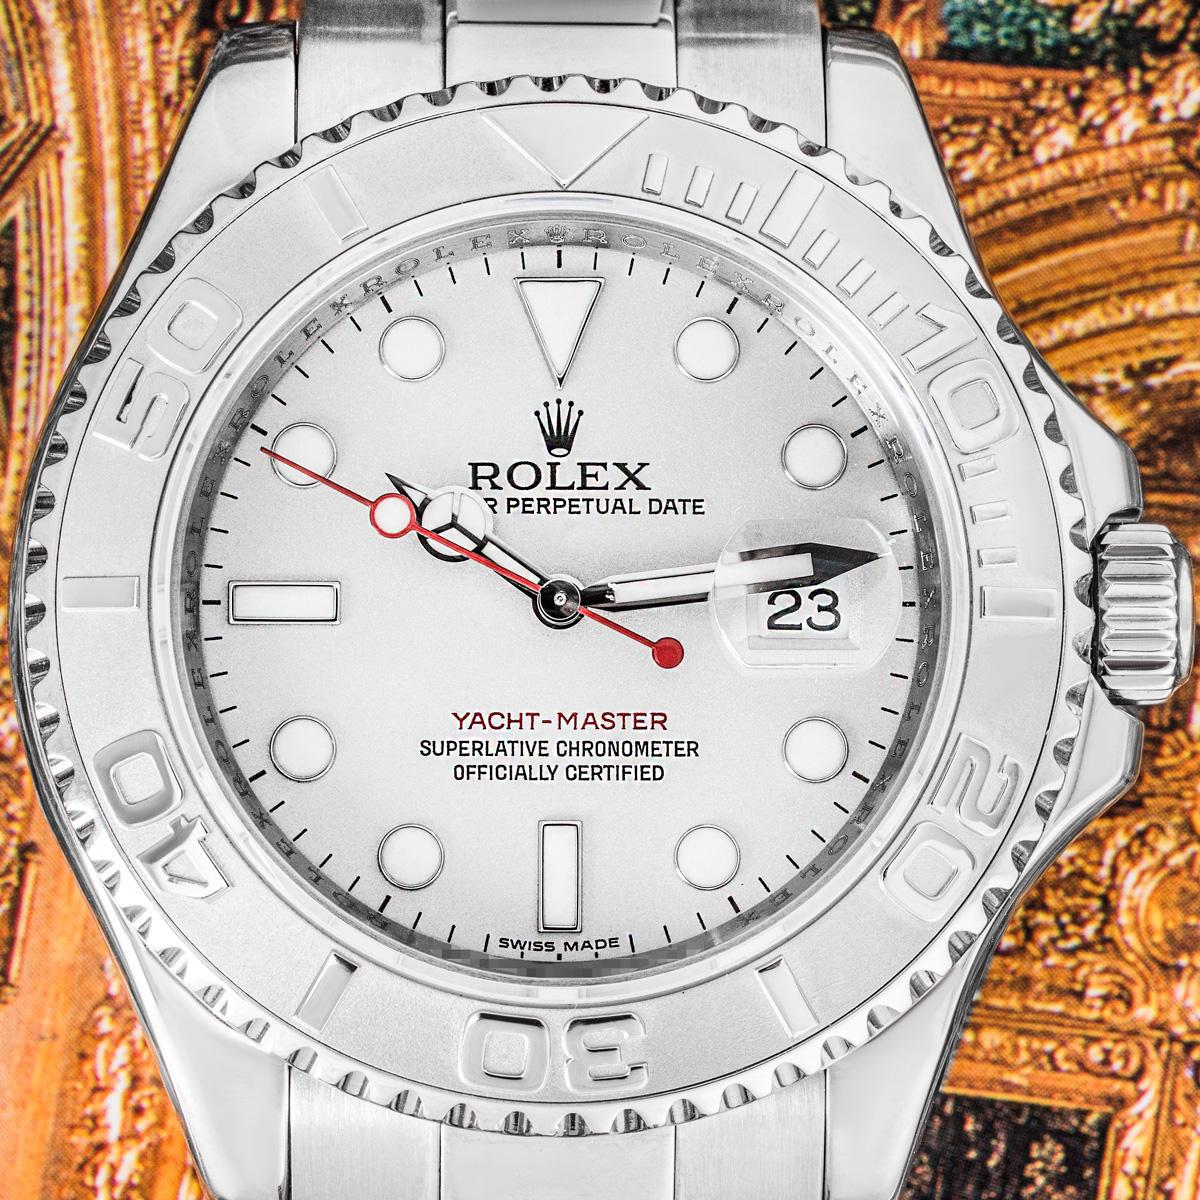 A stainless steel Yacht-Master by Rolex. Featuring a platinum dial with a date display, and a bidirectional rotatable bezel which features a platinum insert with 60-minute graduated numerals.

Equipped with an Oyster bracelet and a folding